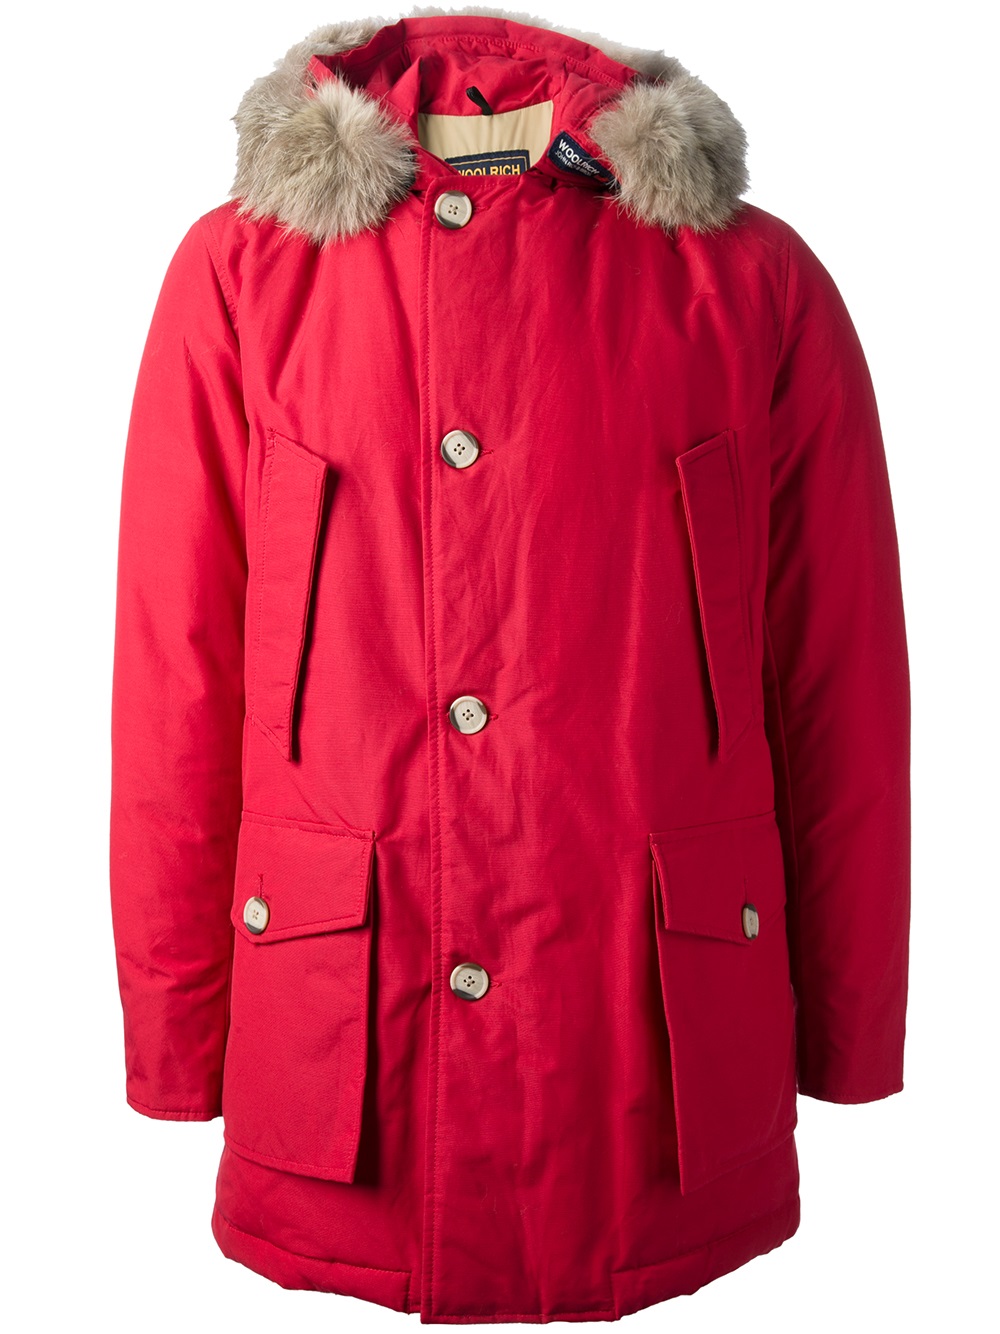 Lyst - Woolrich Hooded Parka in Red for Men